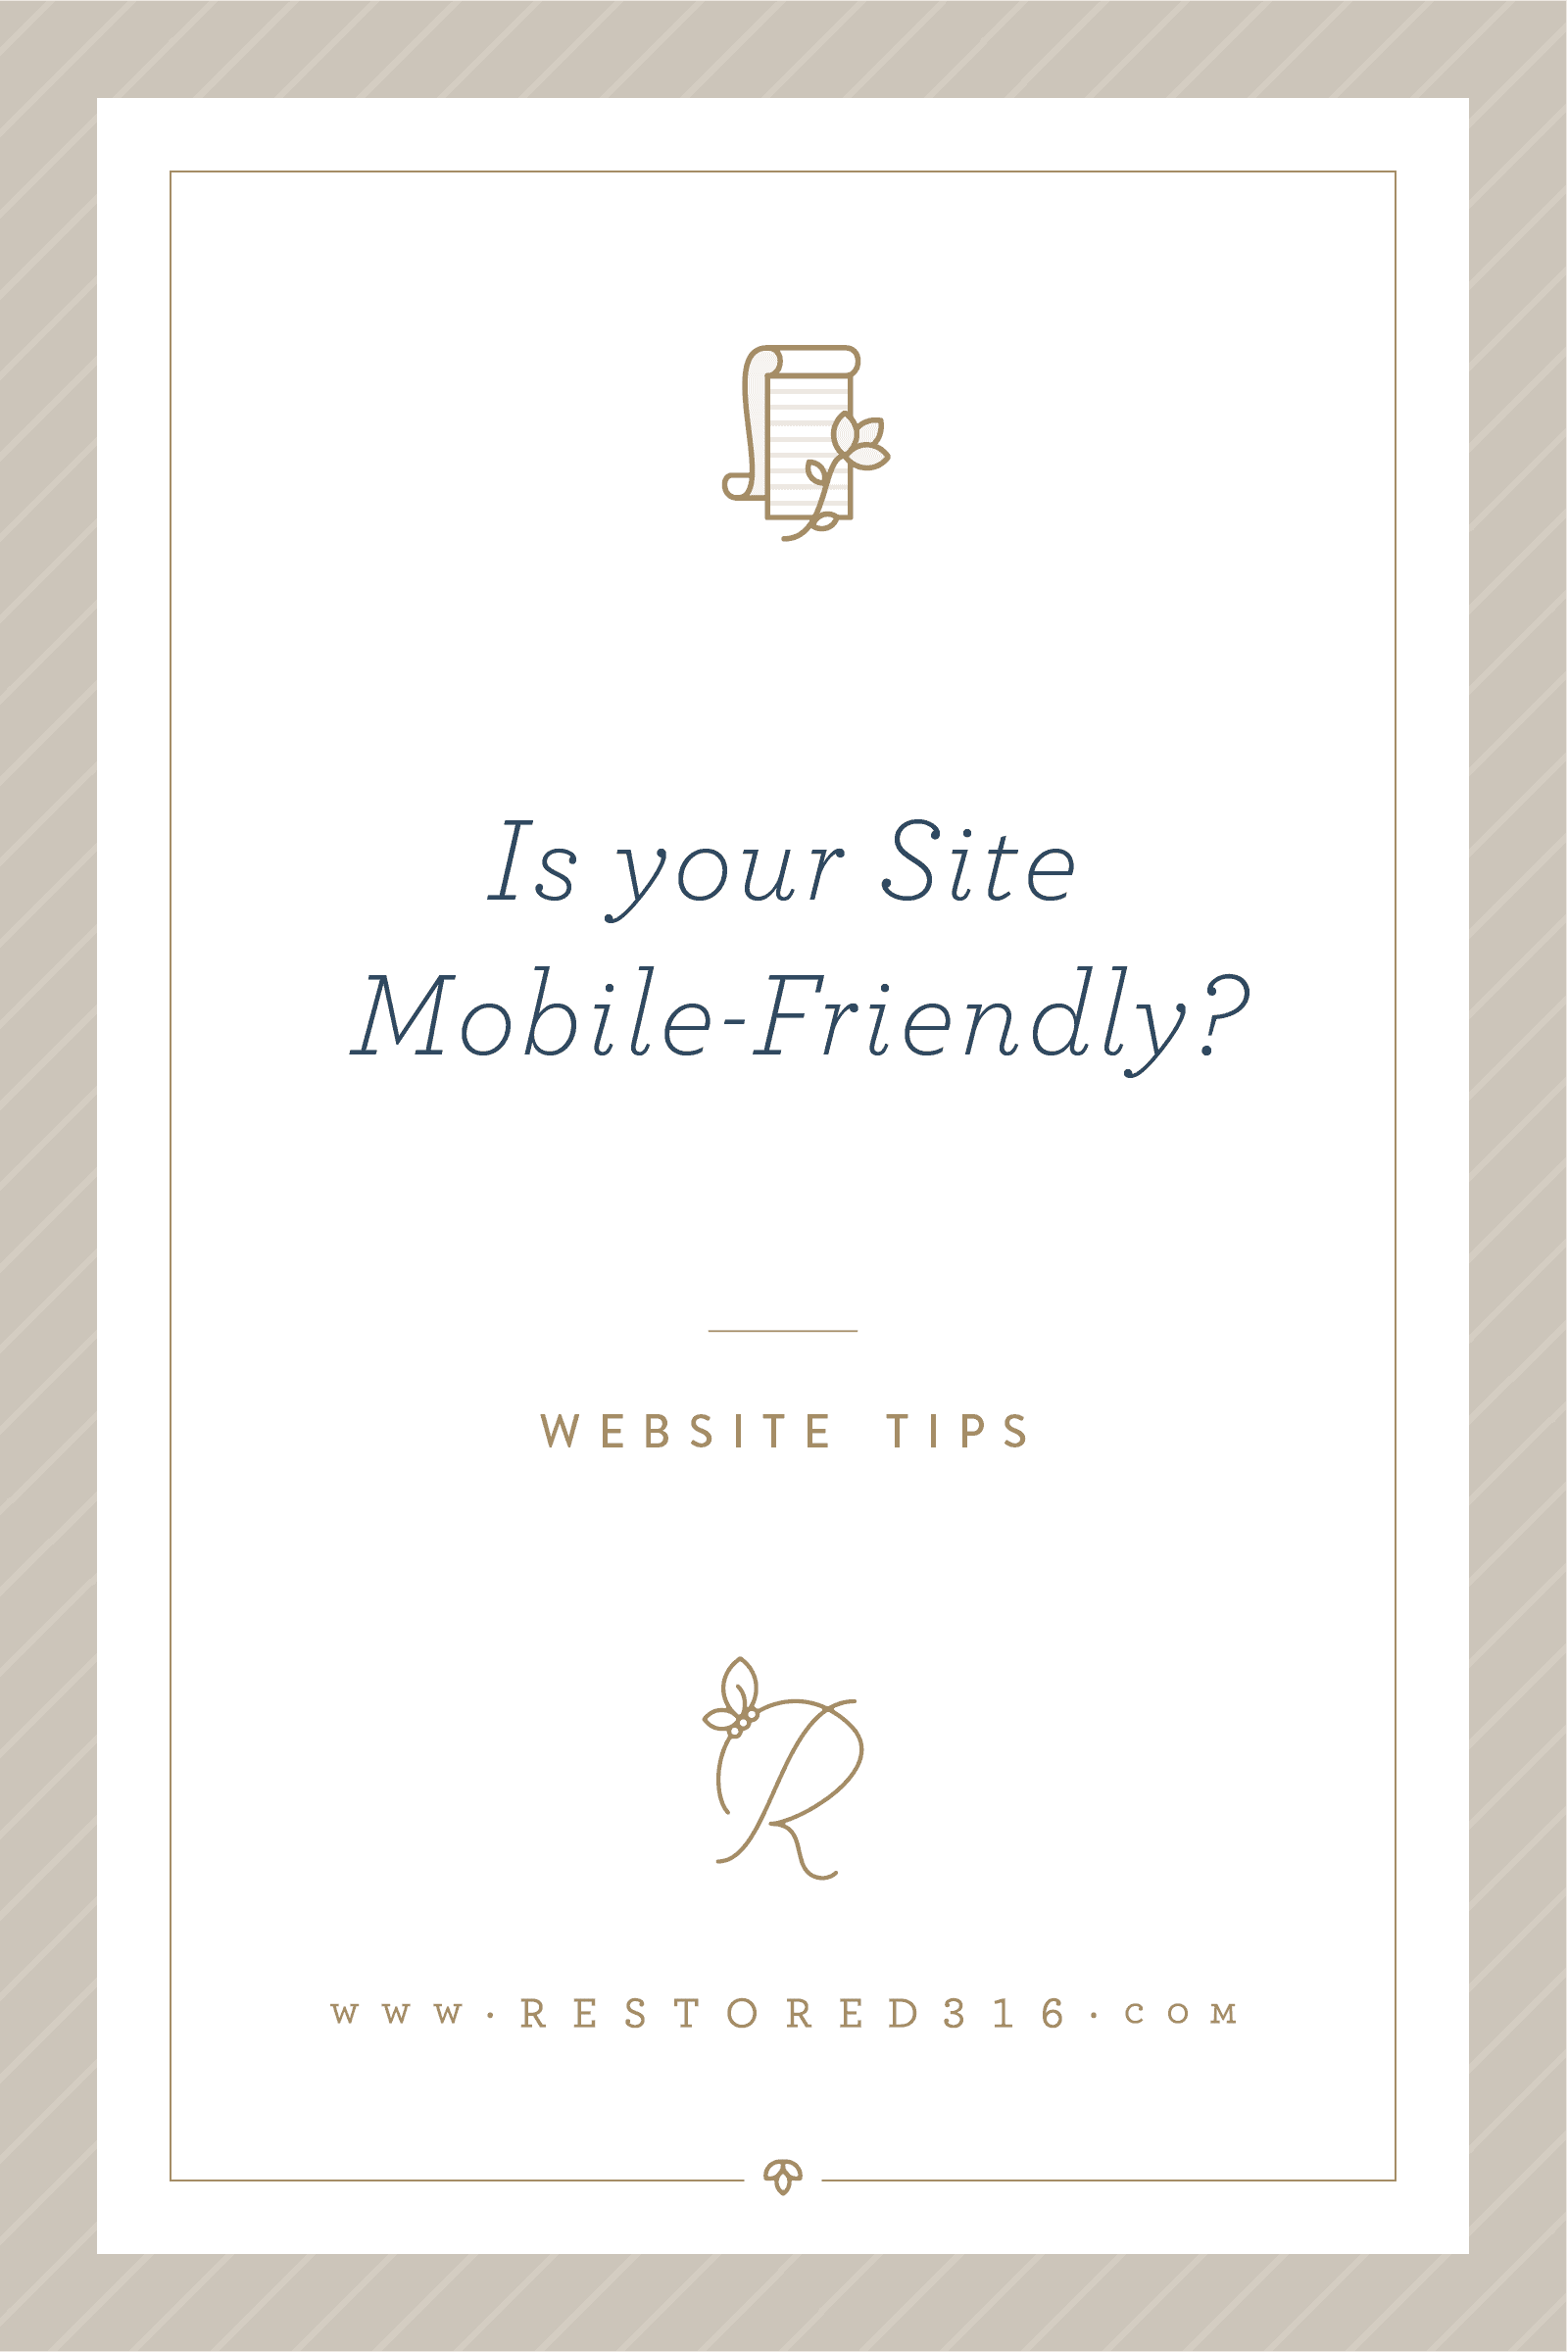 Is your site mobile-friendly?